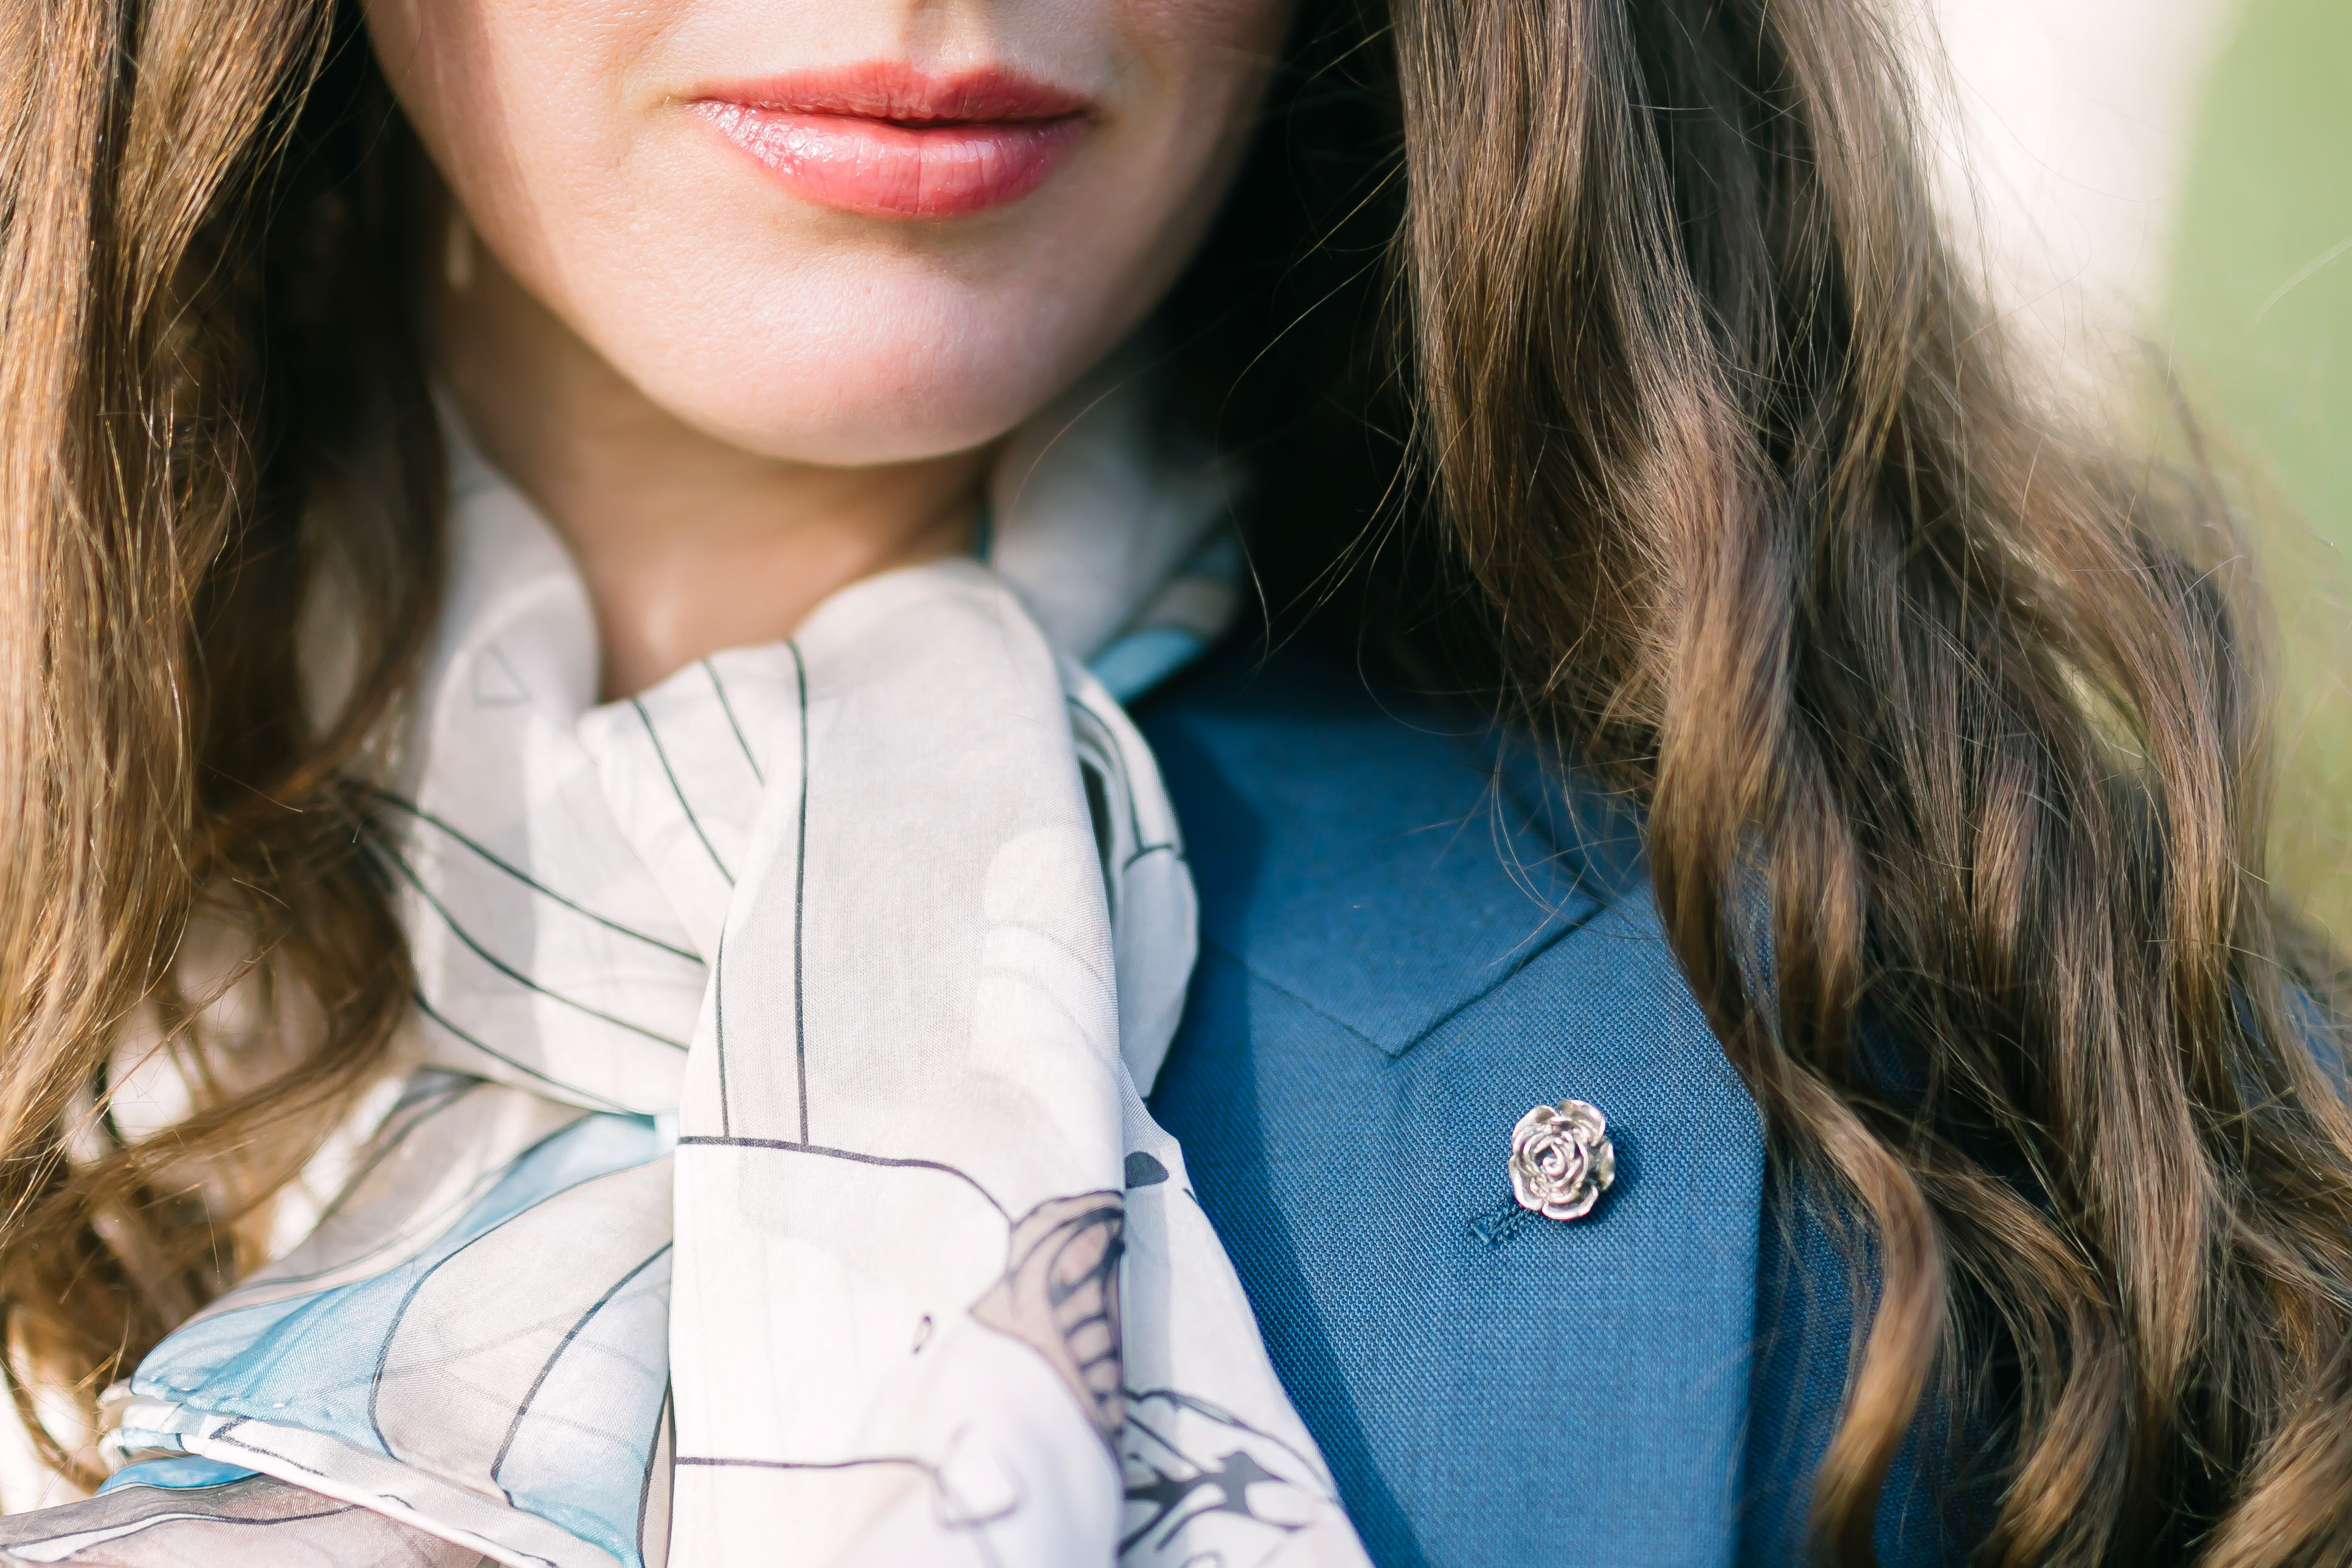 Accessorize your business outfit with a Lapel Chain